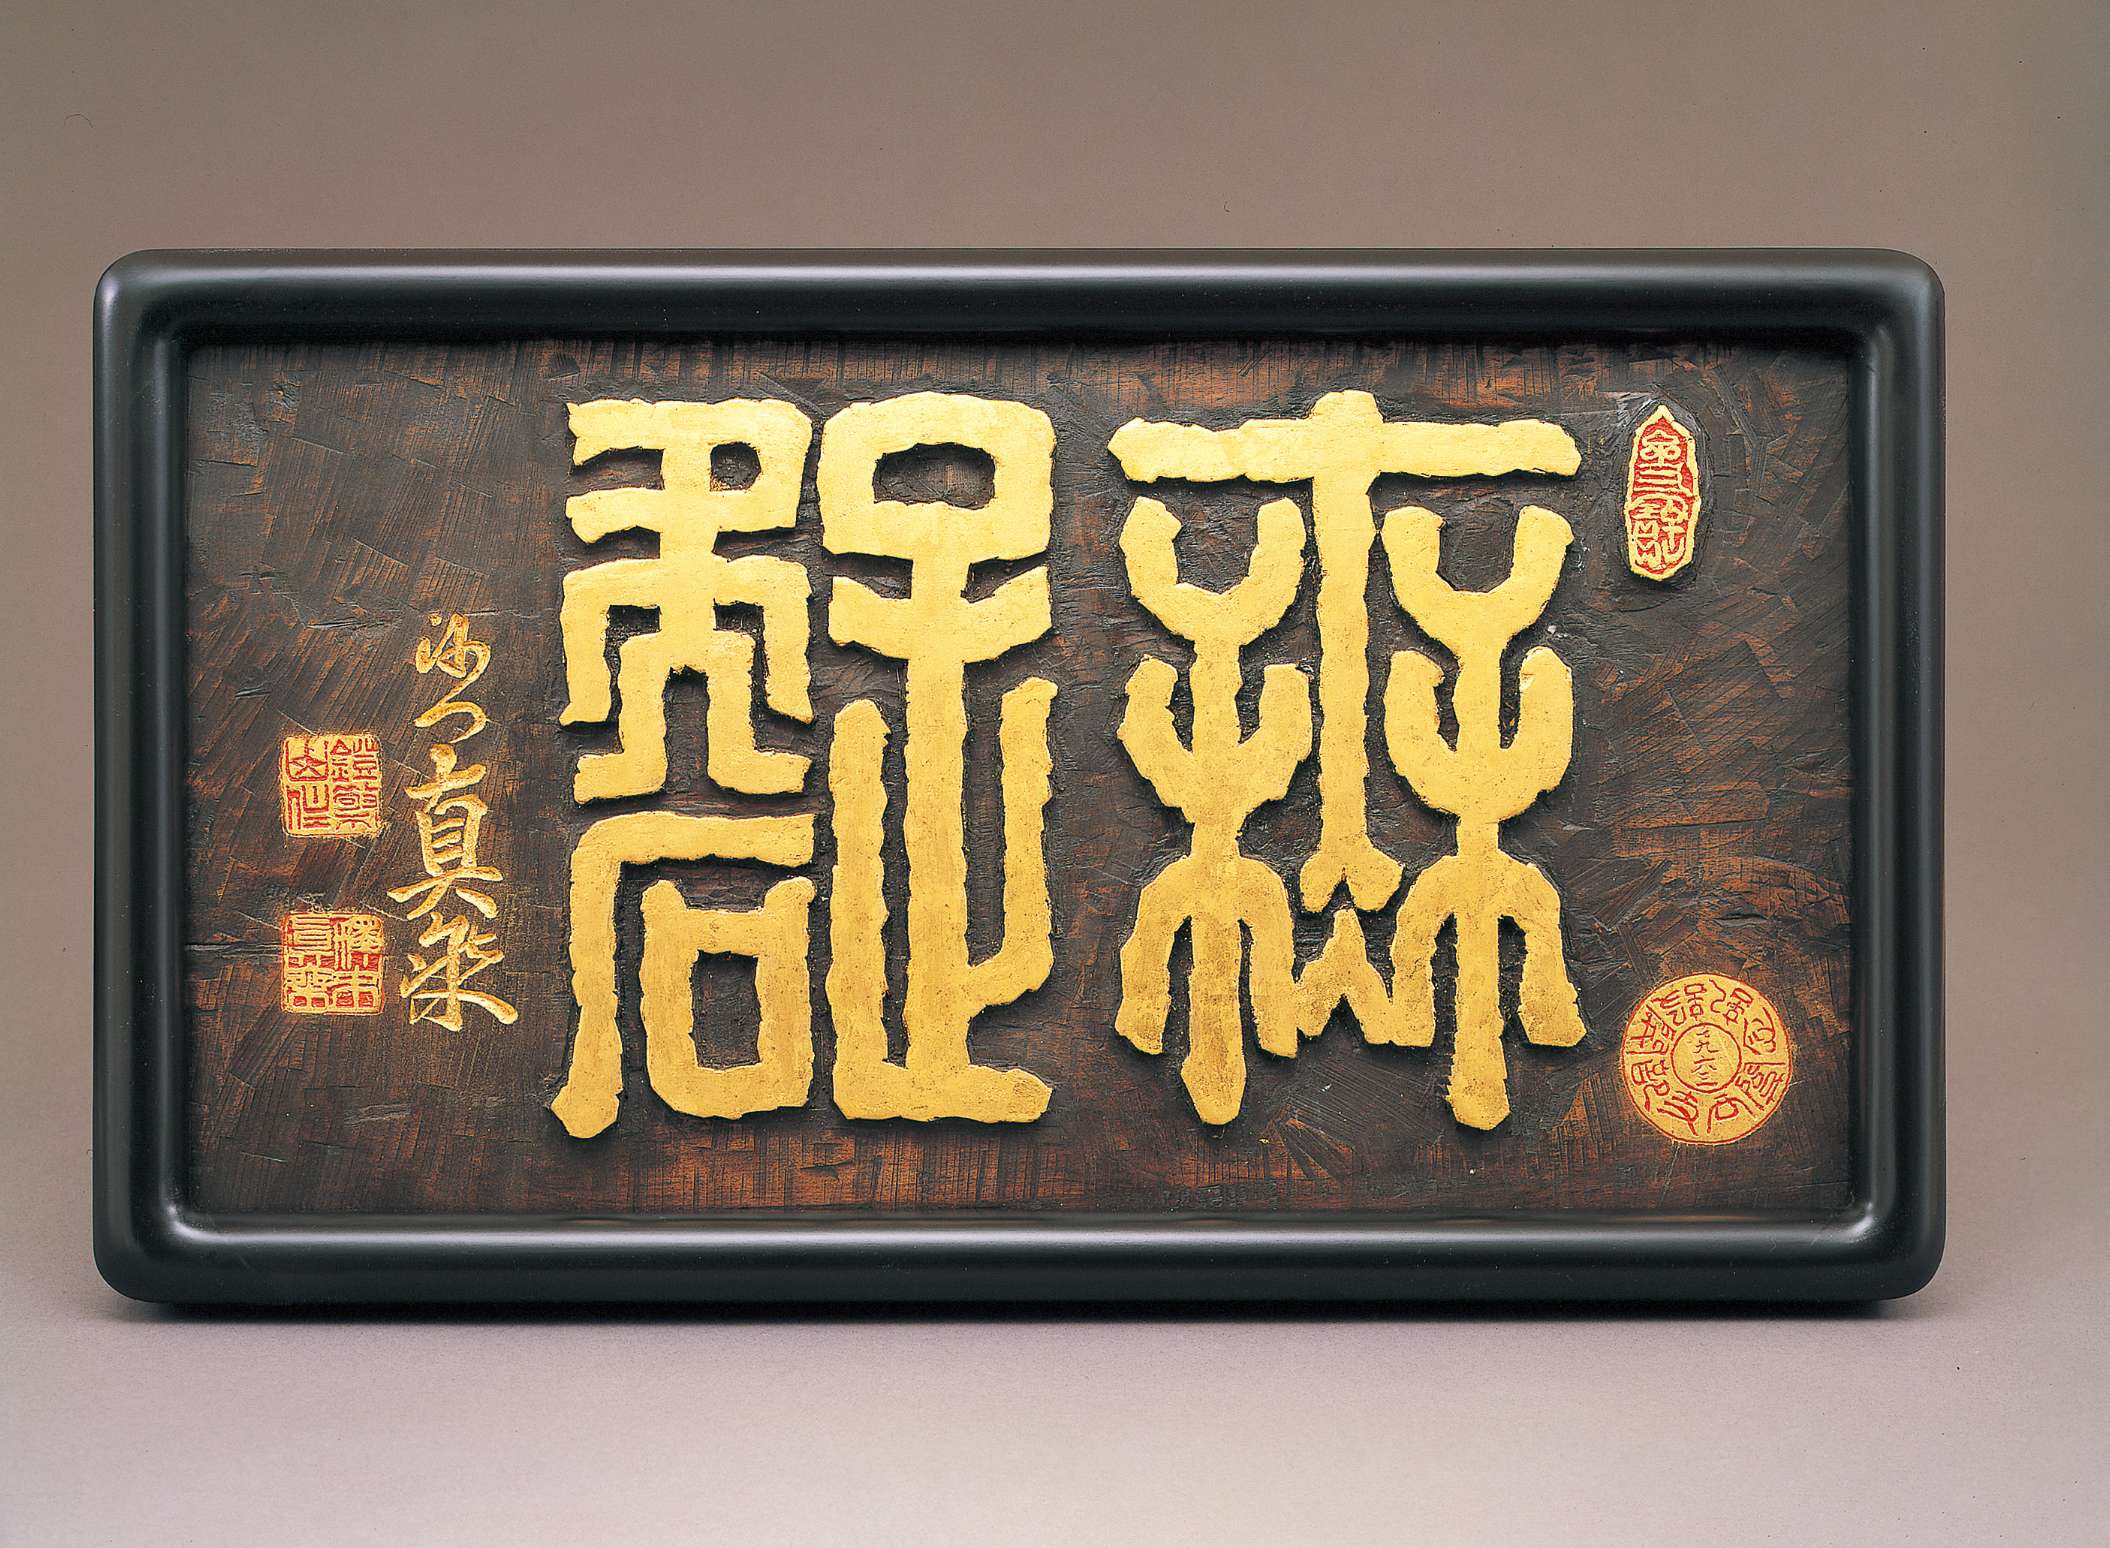 Stylized, thick-lined Japanese characters in gold are carved into a slab of dark brown wood in a black frame, embellished by adjacent golden calligraphy and red and gold seals.